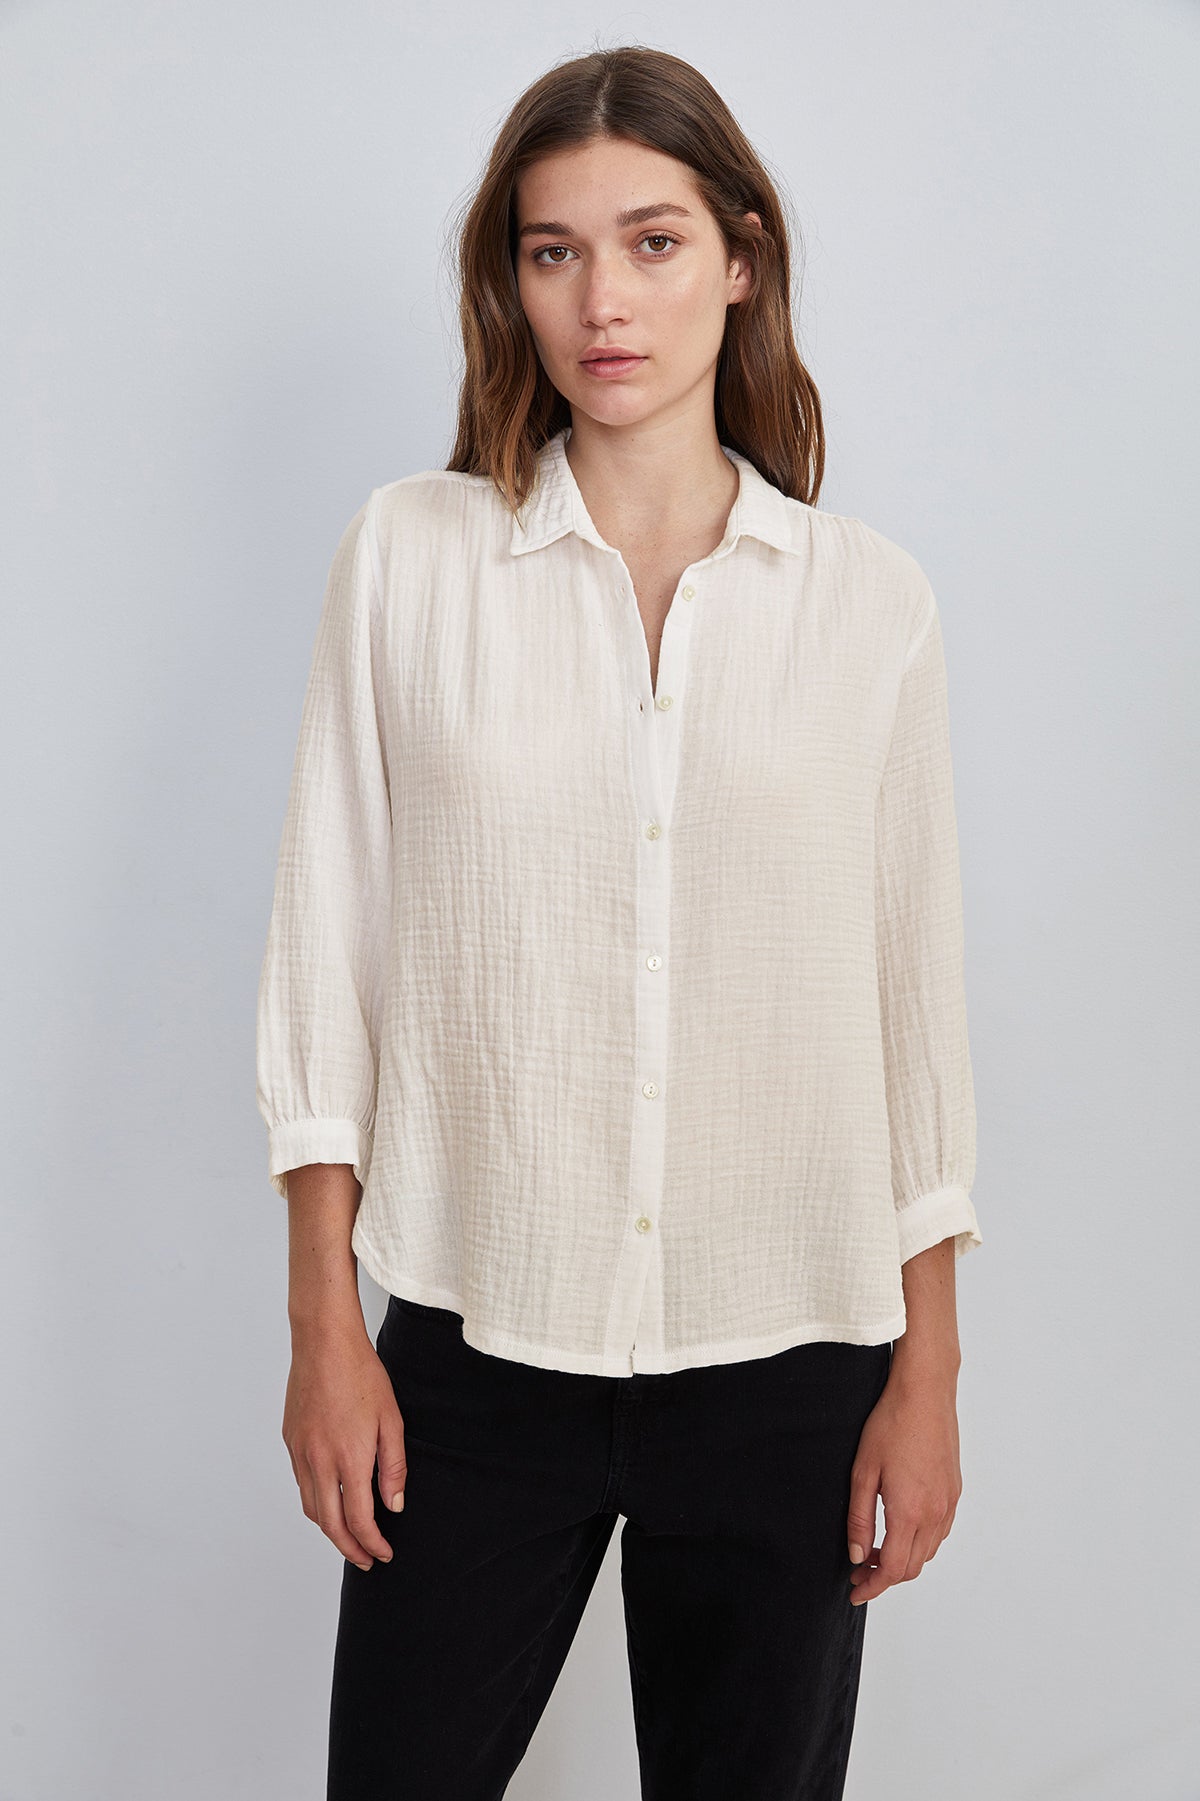   DAYNA 3/4 SLEEVE BUTTON-UP BLOUSE 